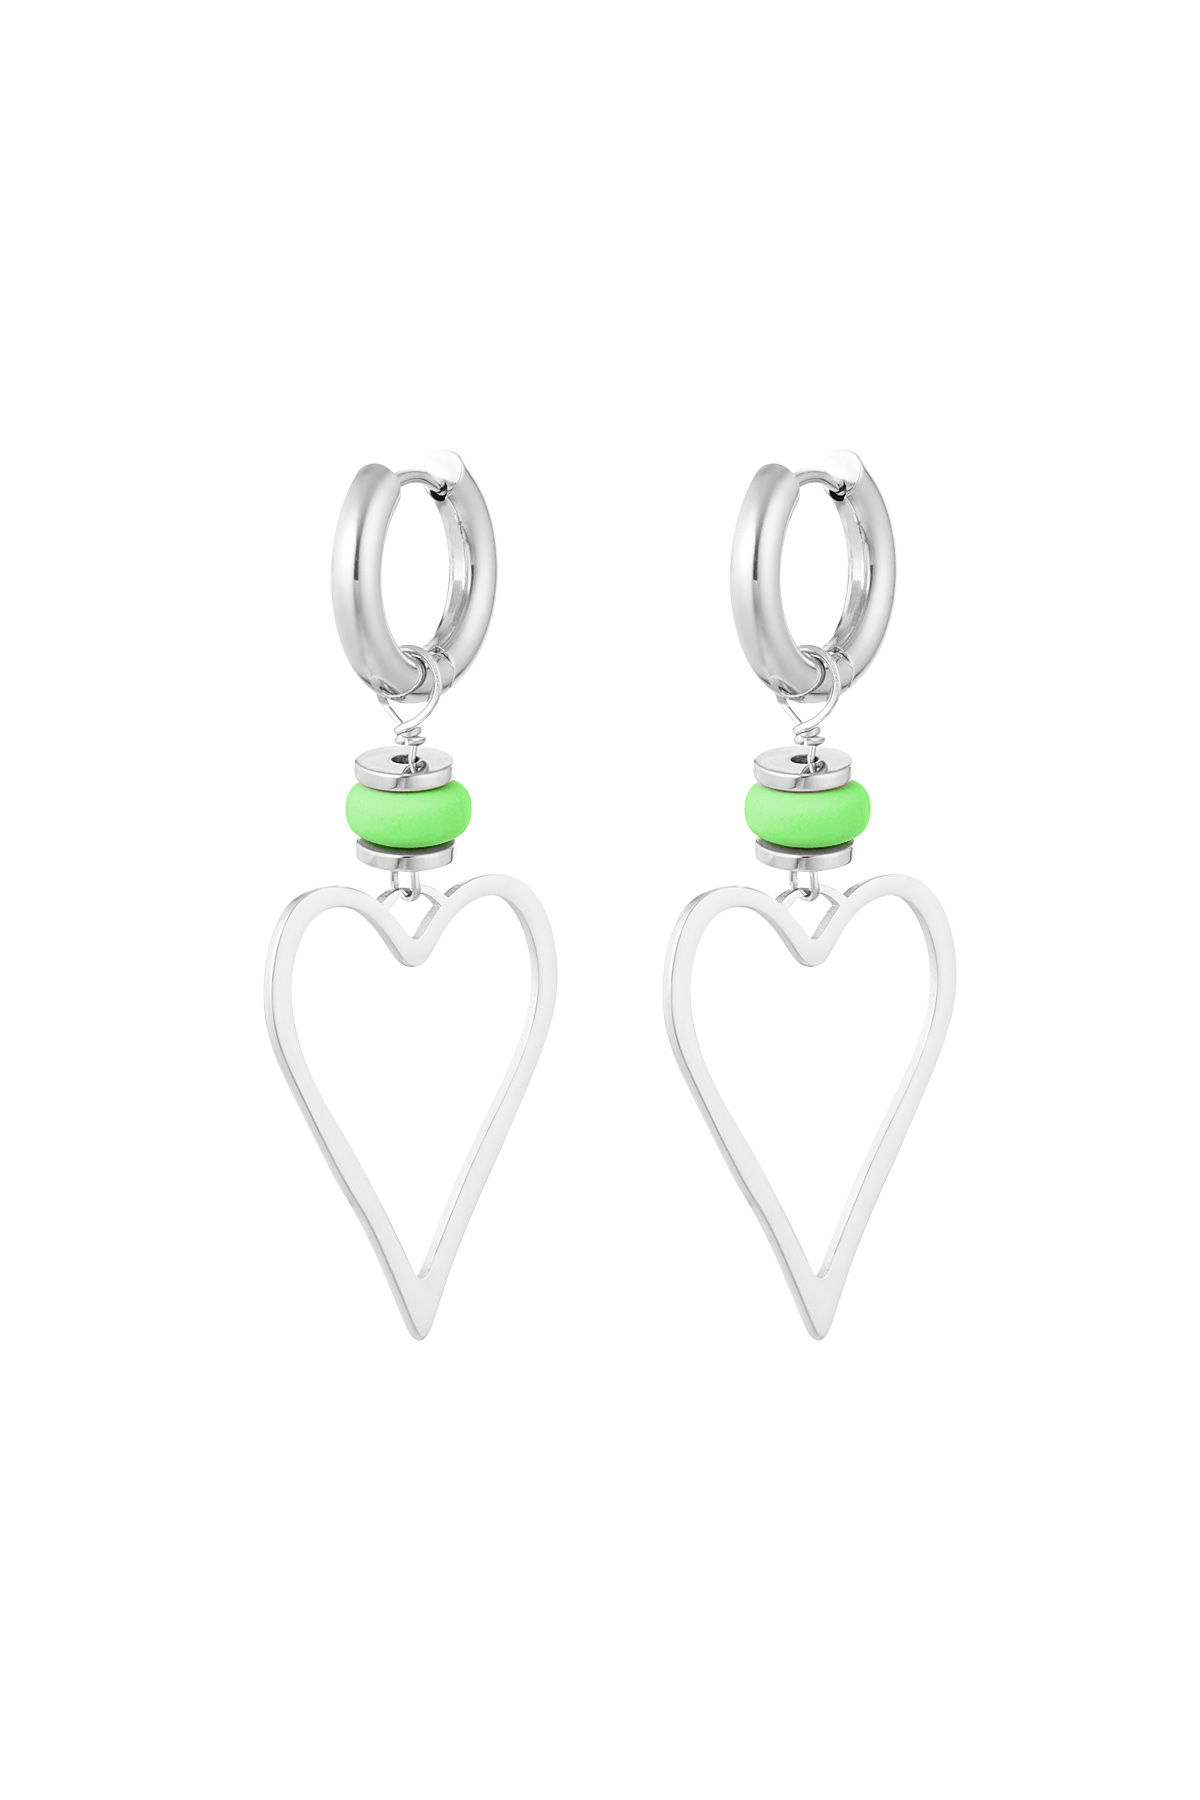 Earrings heart with bead - silver/green h5 